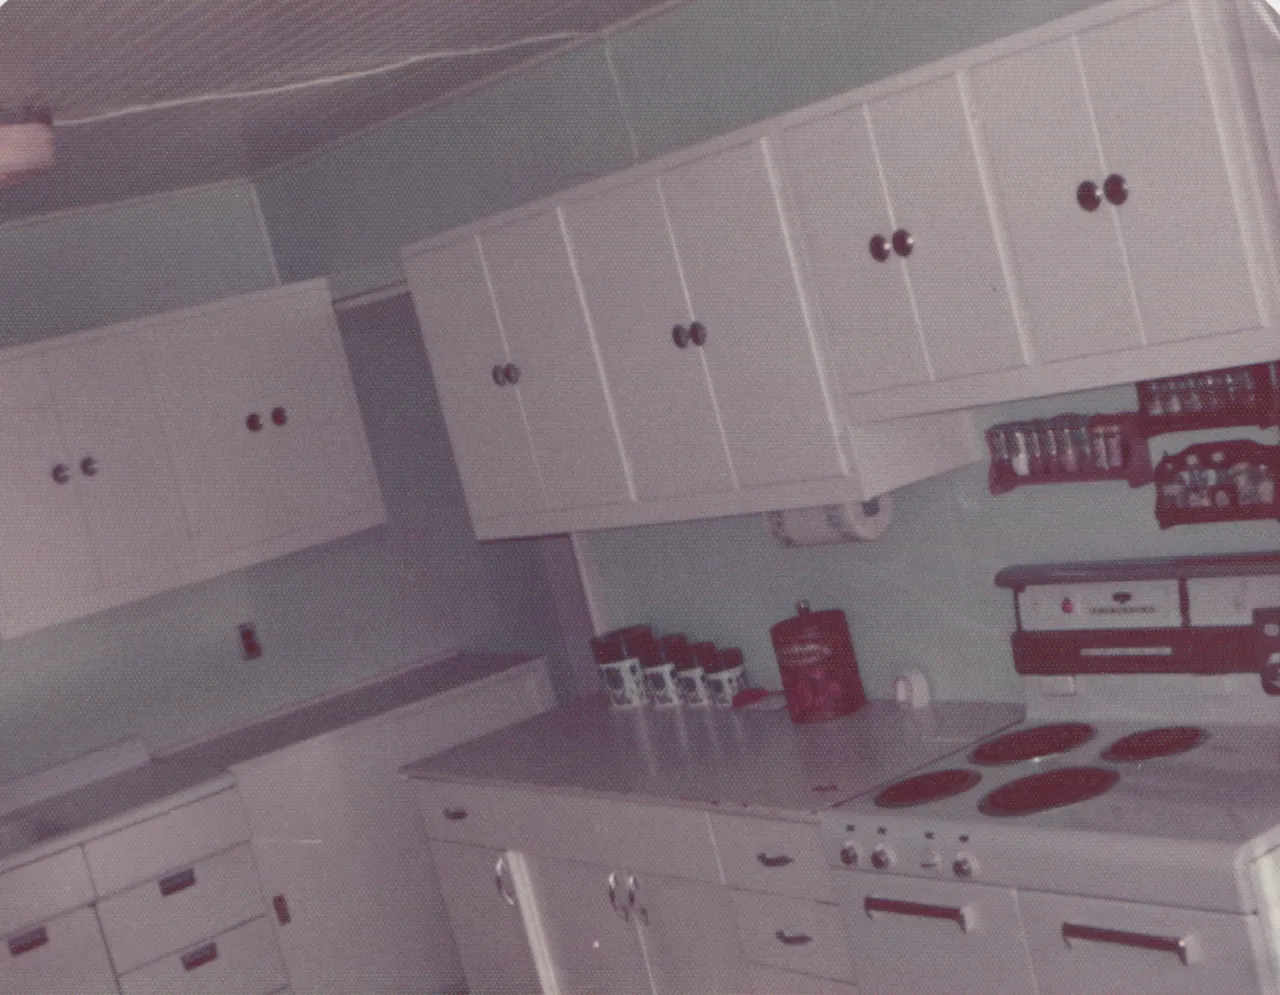 1974-12-02 - Monday - white kitchen, piano with pictures, curtains, bed, no date on these 5pics but probably on or after this date, 5pic-5.png